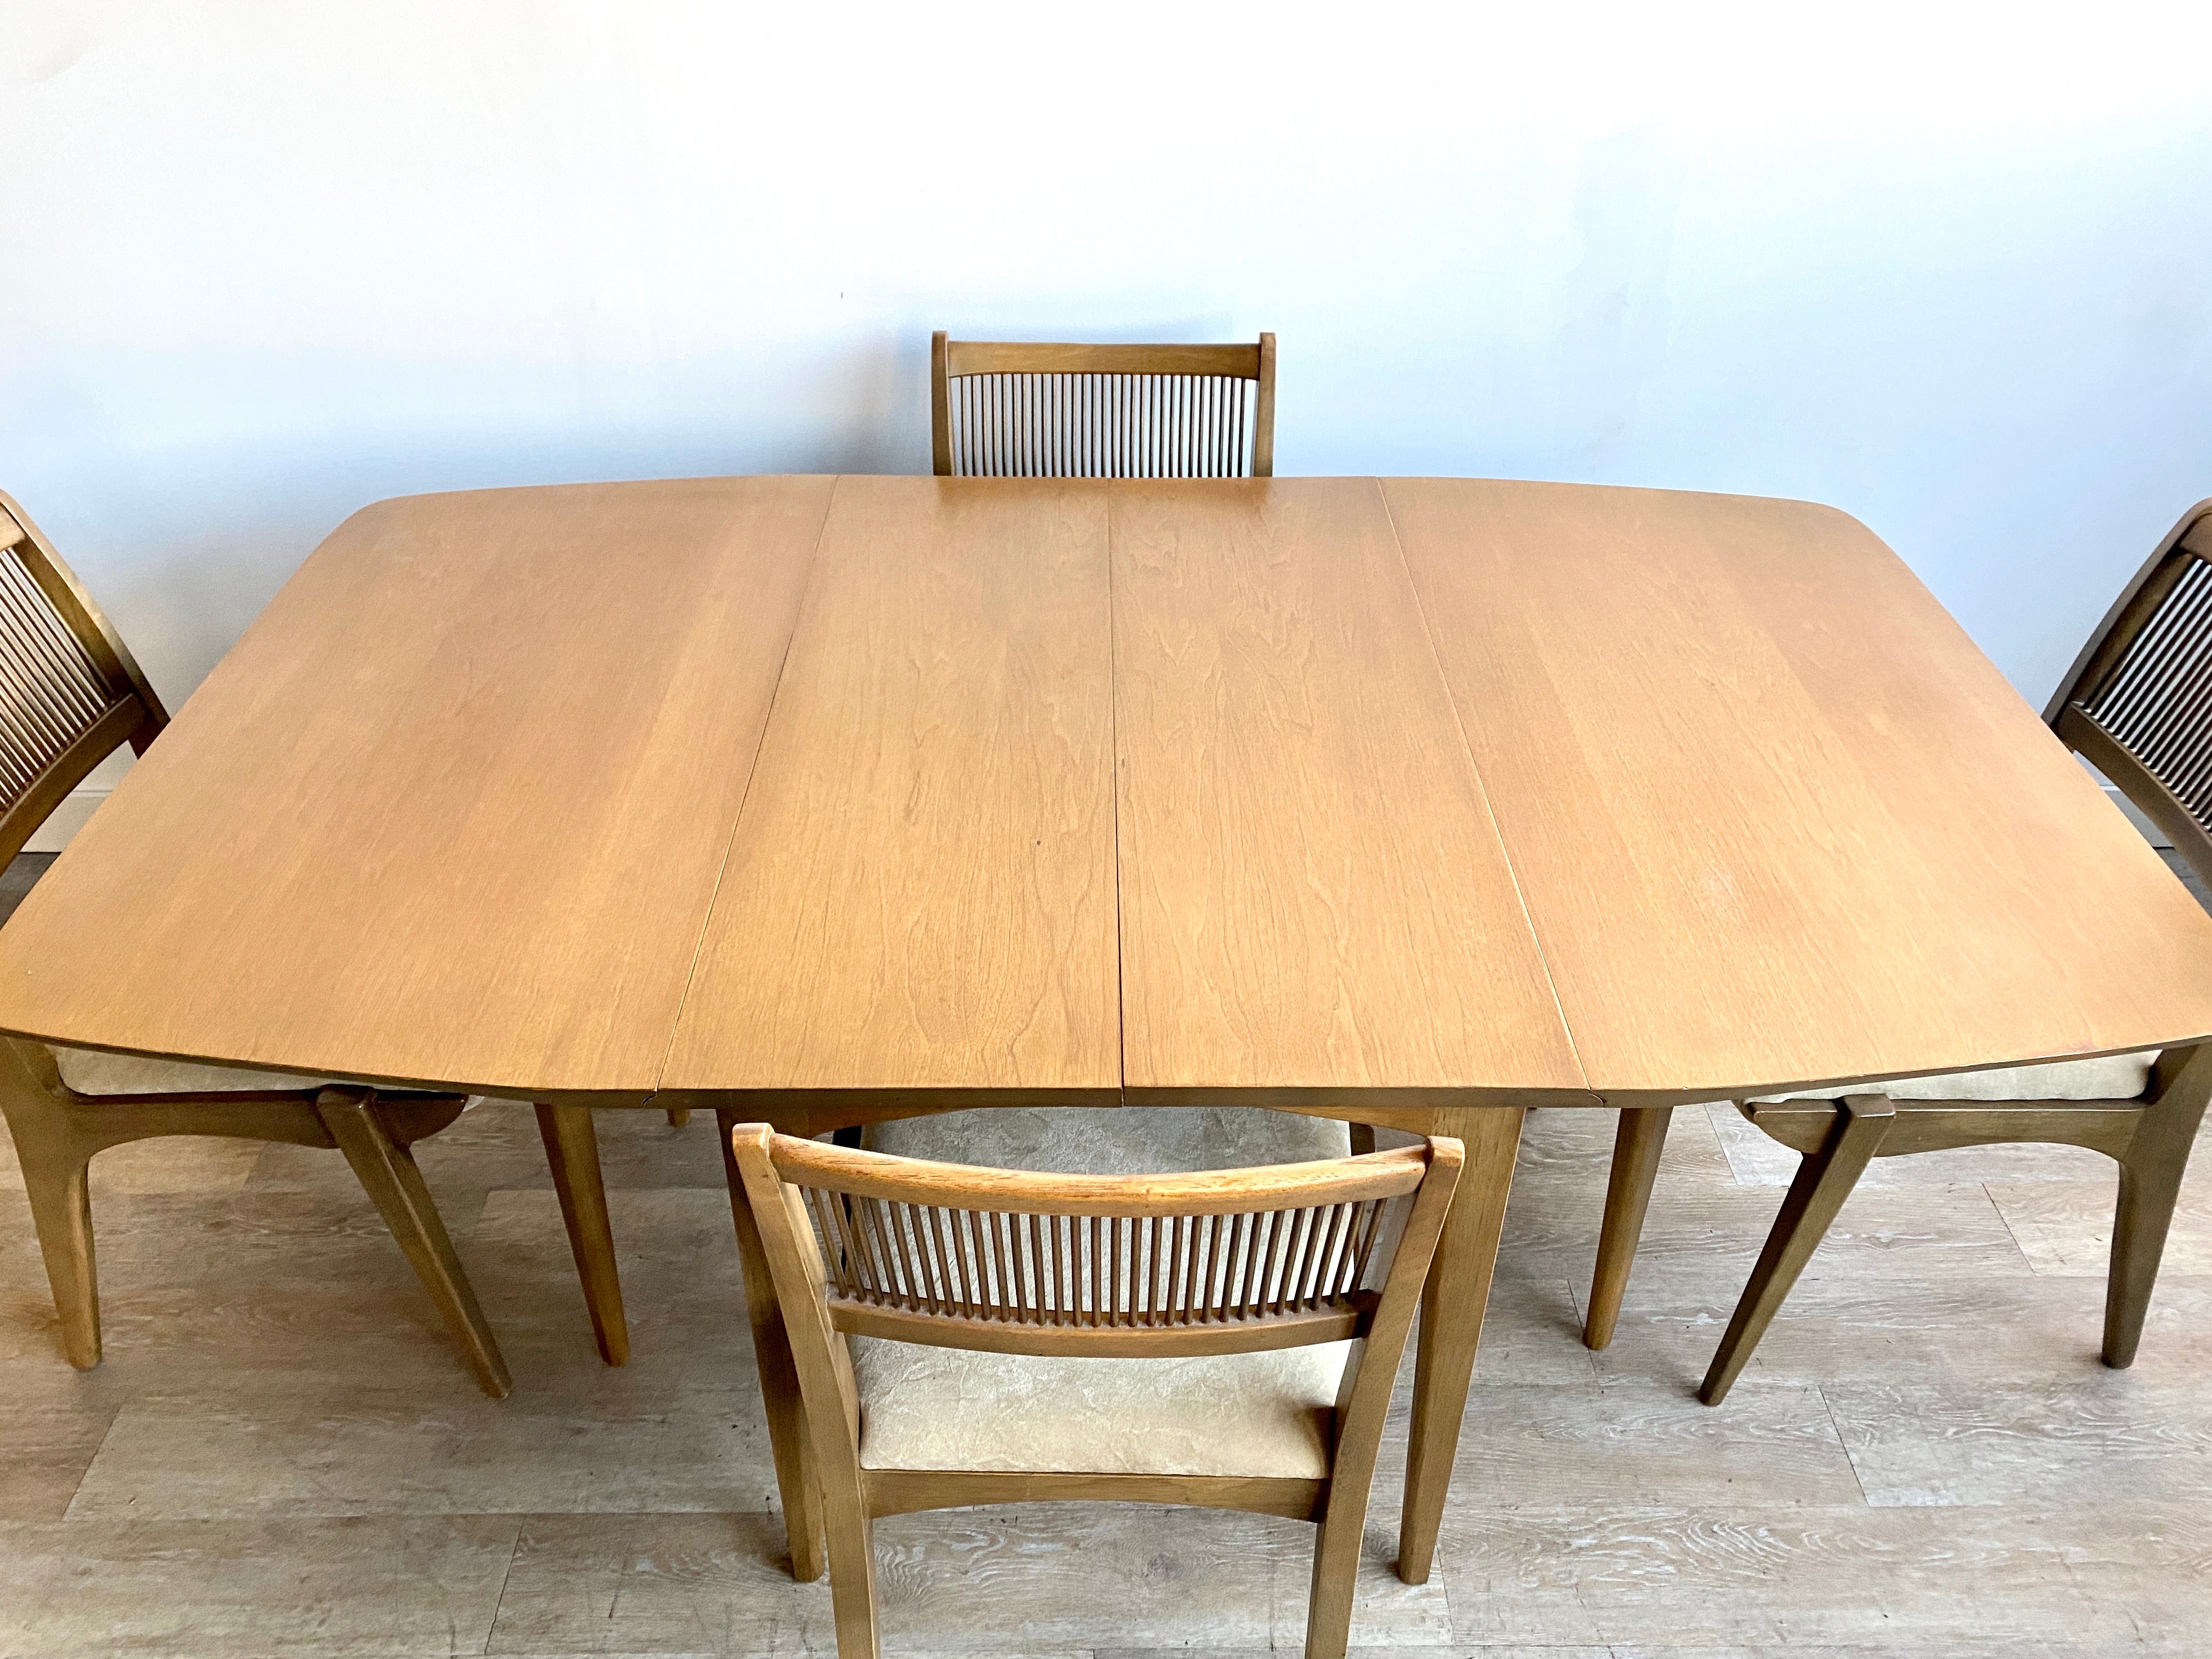 Vintage Mod Century Drexel Profile Dining Table + Four Chairs + Three Leaves